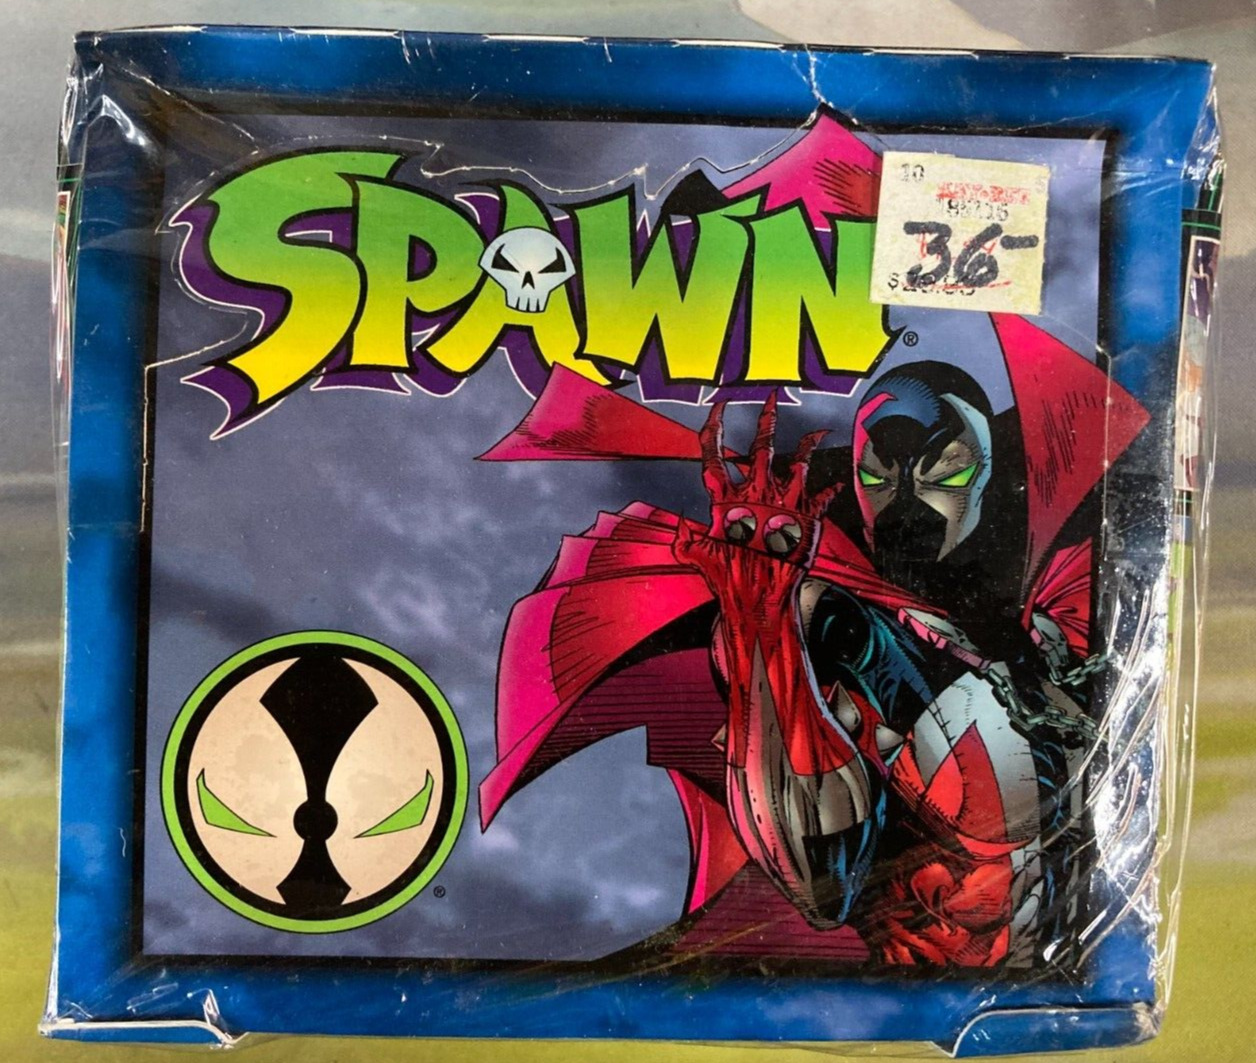 1995 Todd McFarlane's Spawn Trading Cards Box unopened and factory sealed